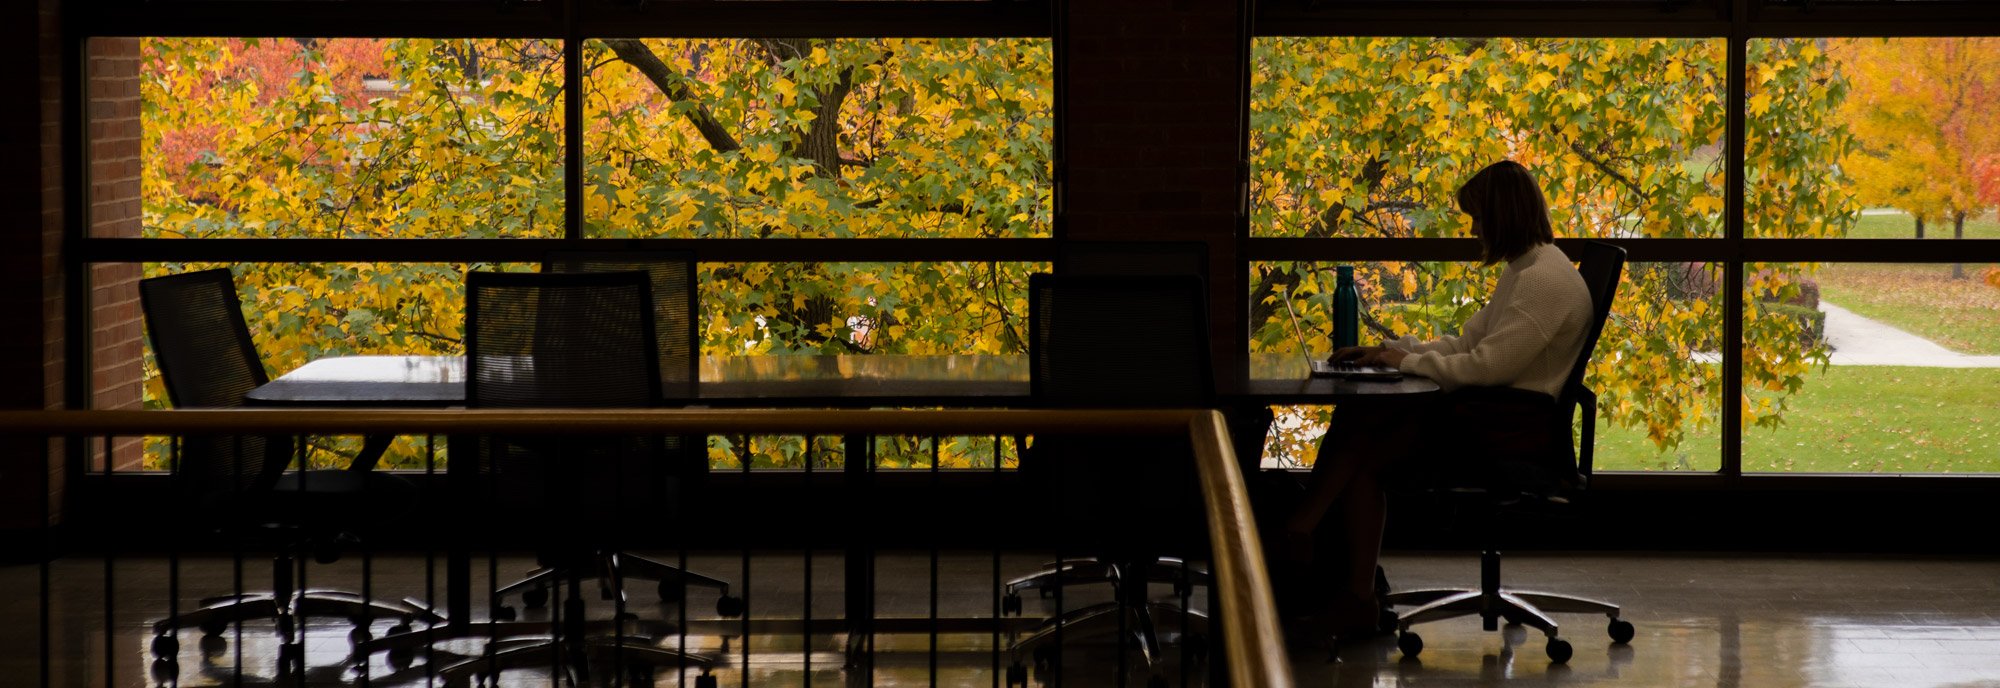 A student works in the 葫芦影业 College of Pharmacy. Fall leaves decorate the campus of 葫芦影业.